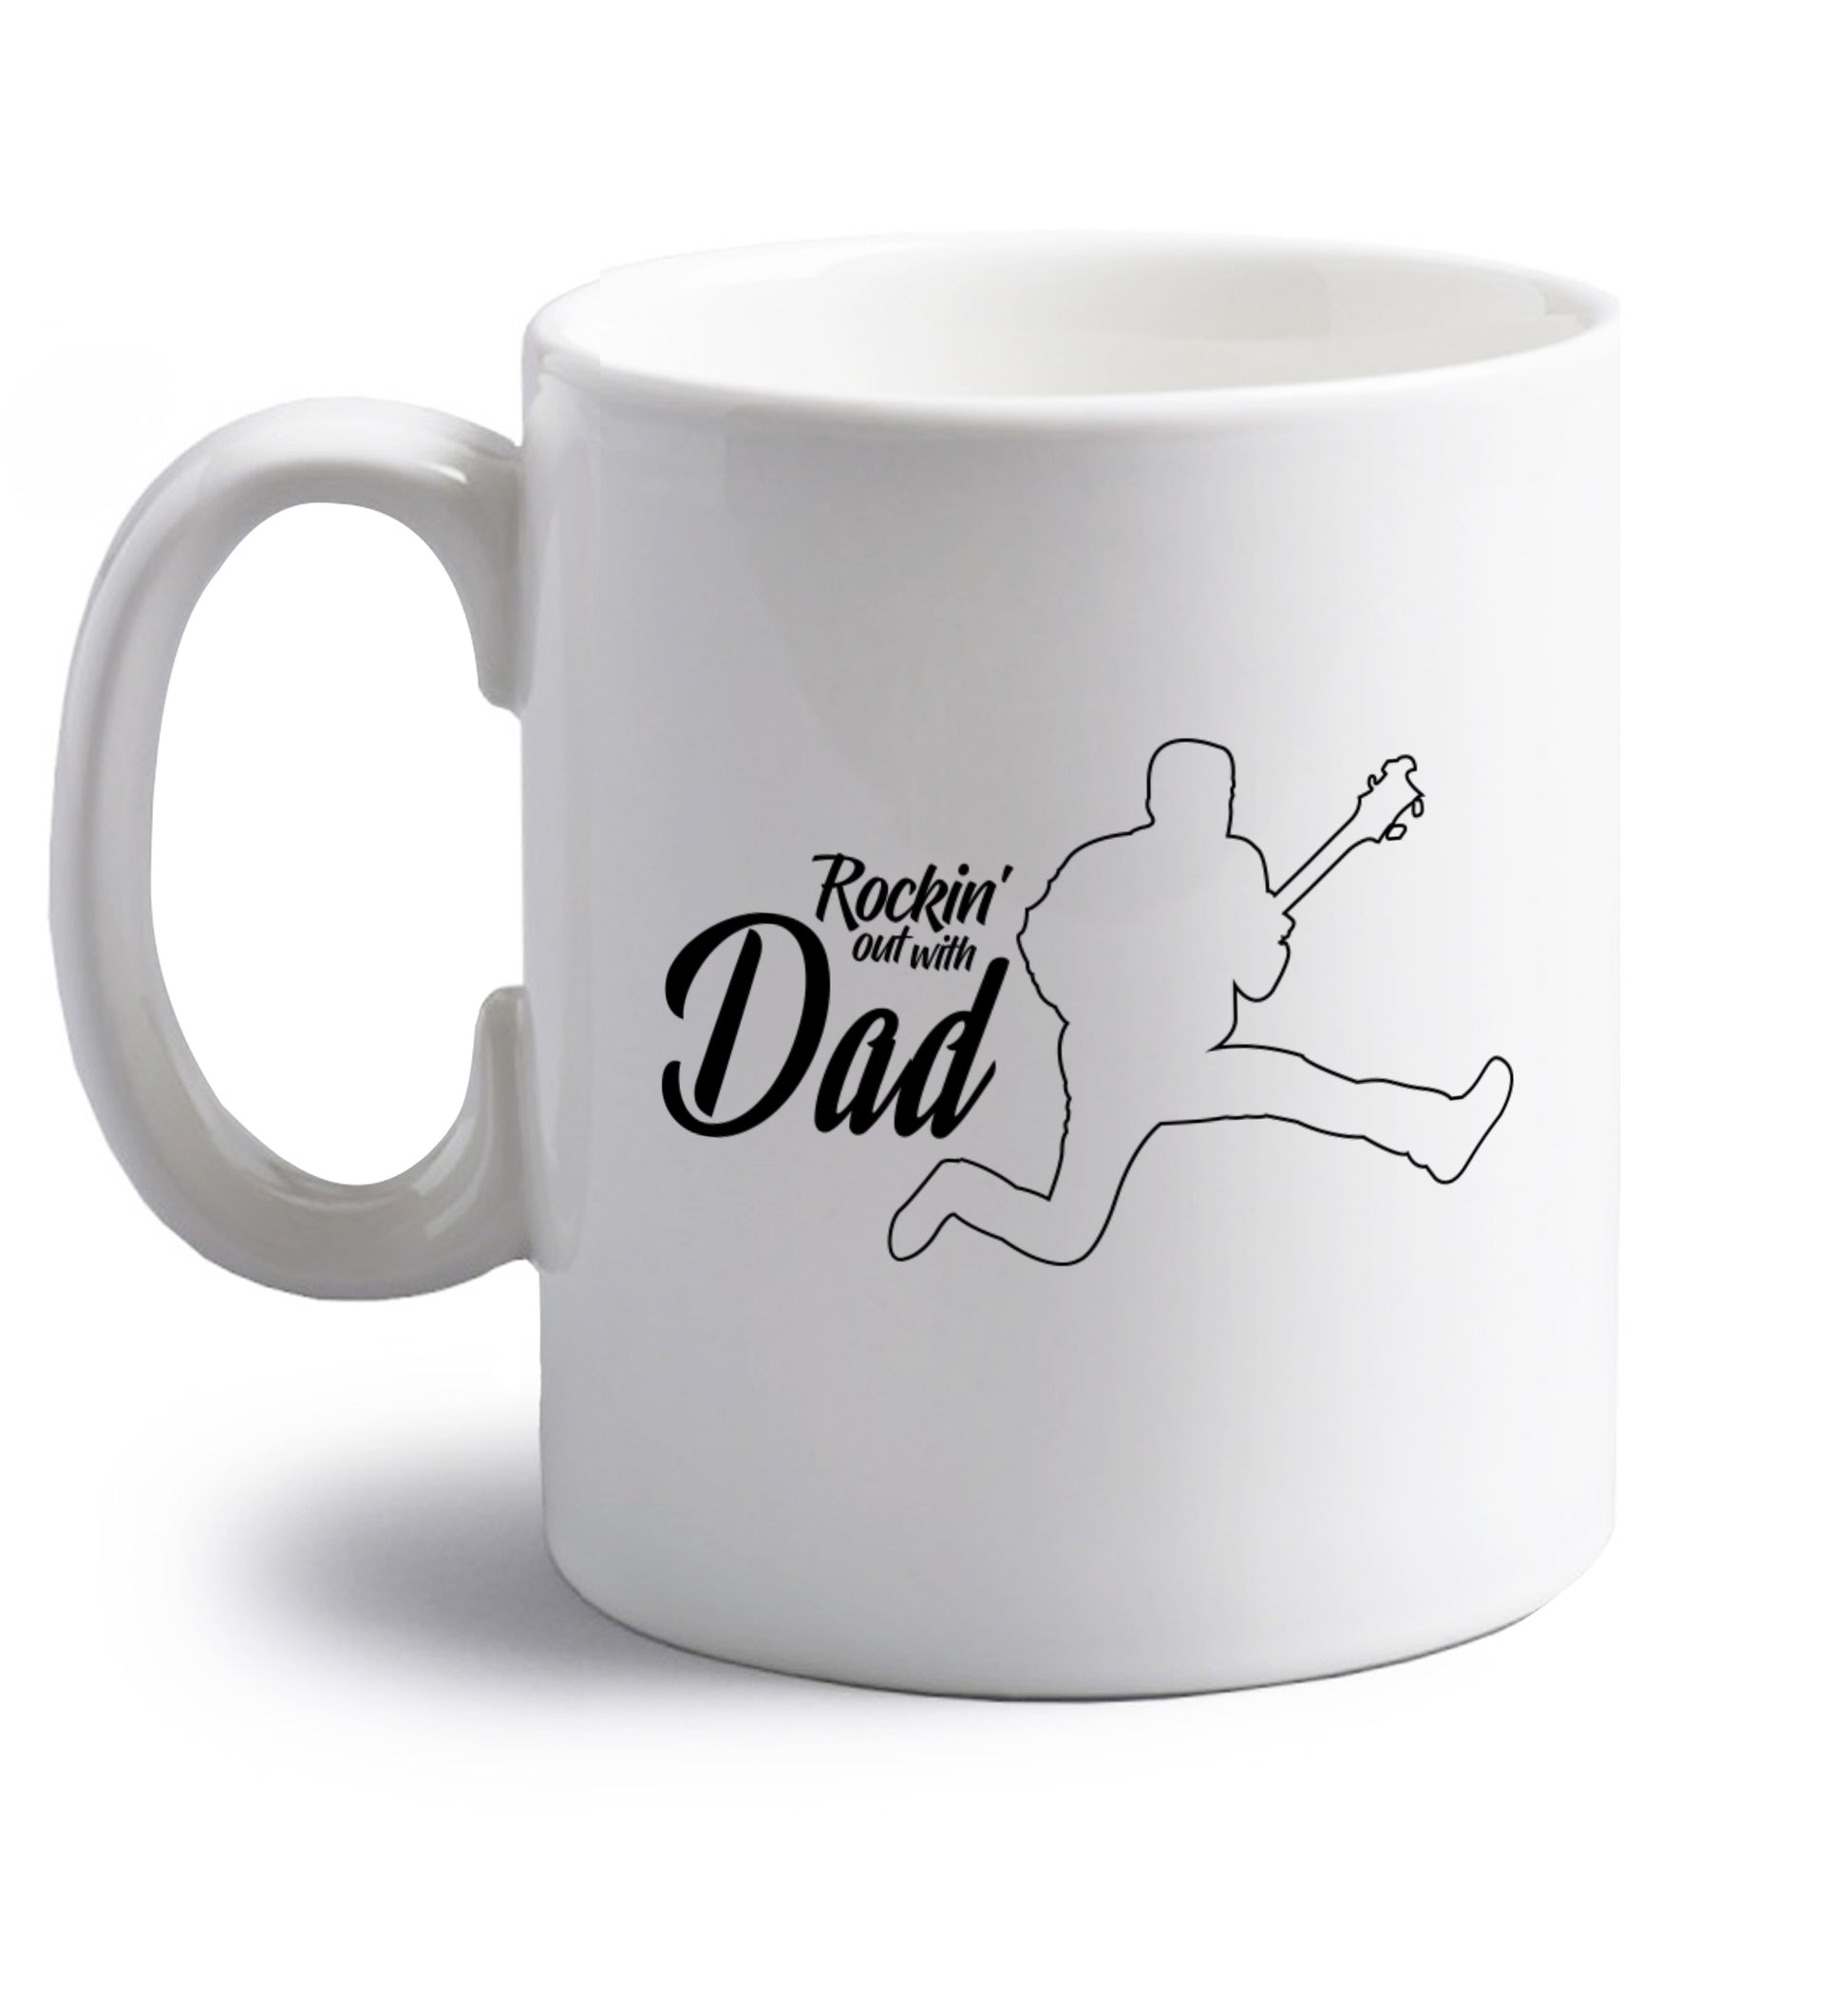 Rockin out with dad right handed white ceramic mug 